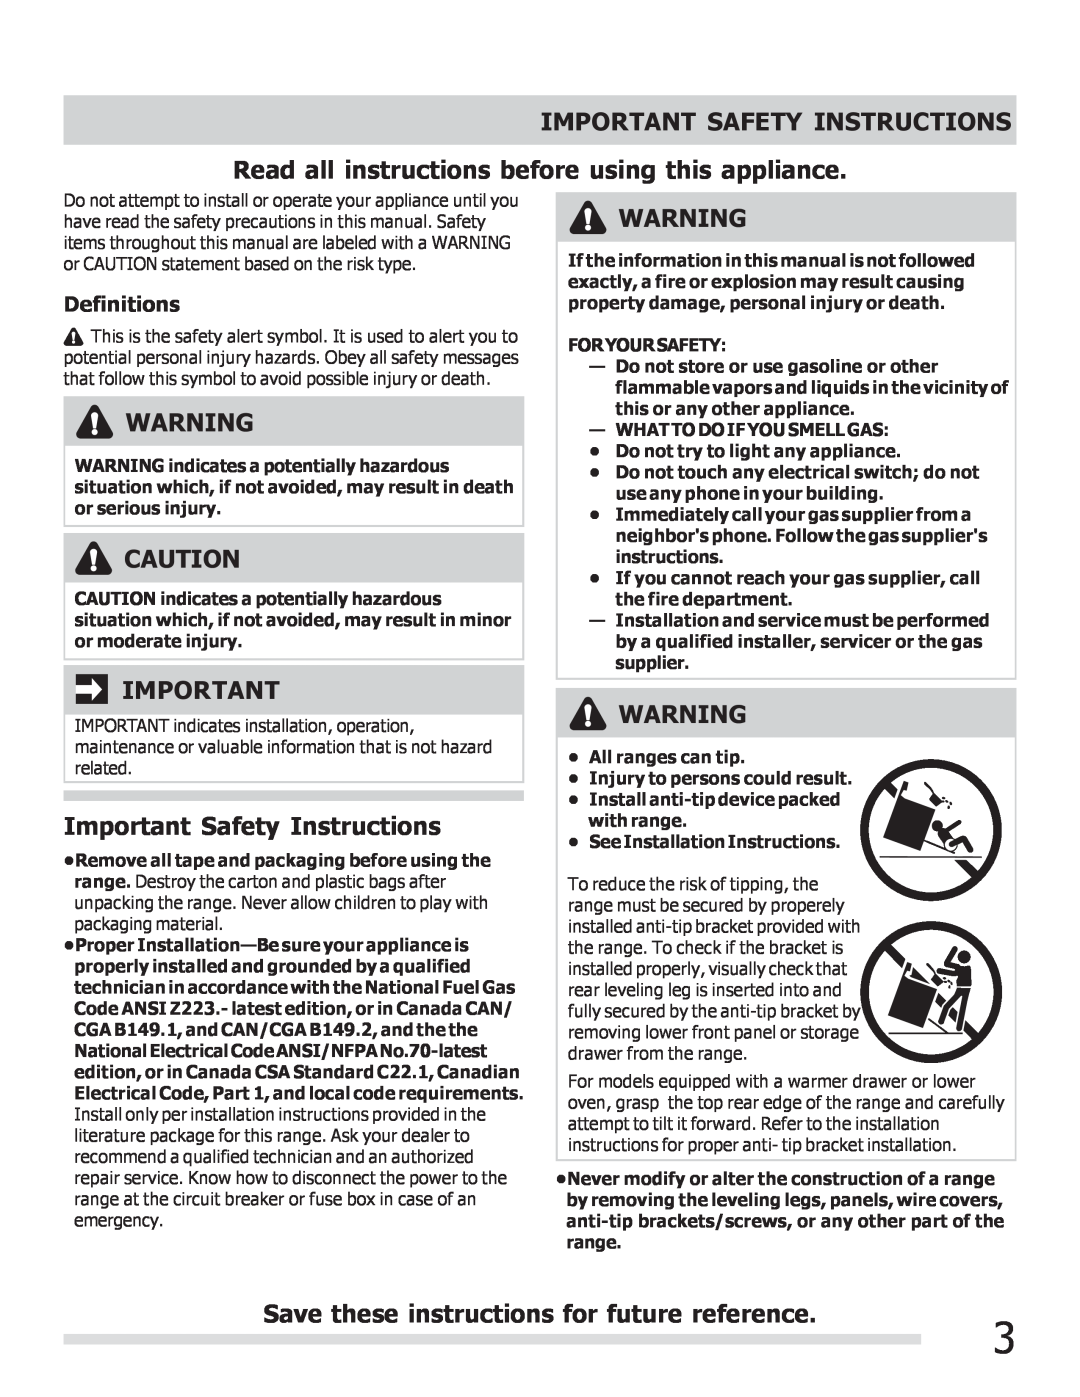 Frigidaire CGGF3054KF Important Safety Instructions, Read all instructions before using this appliance, Definitions 